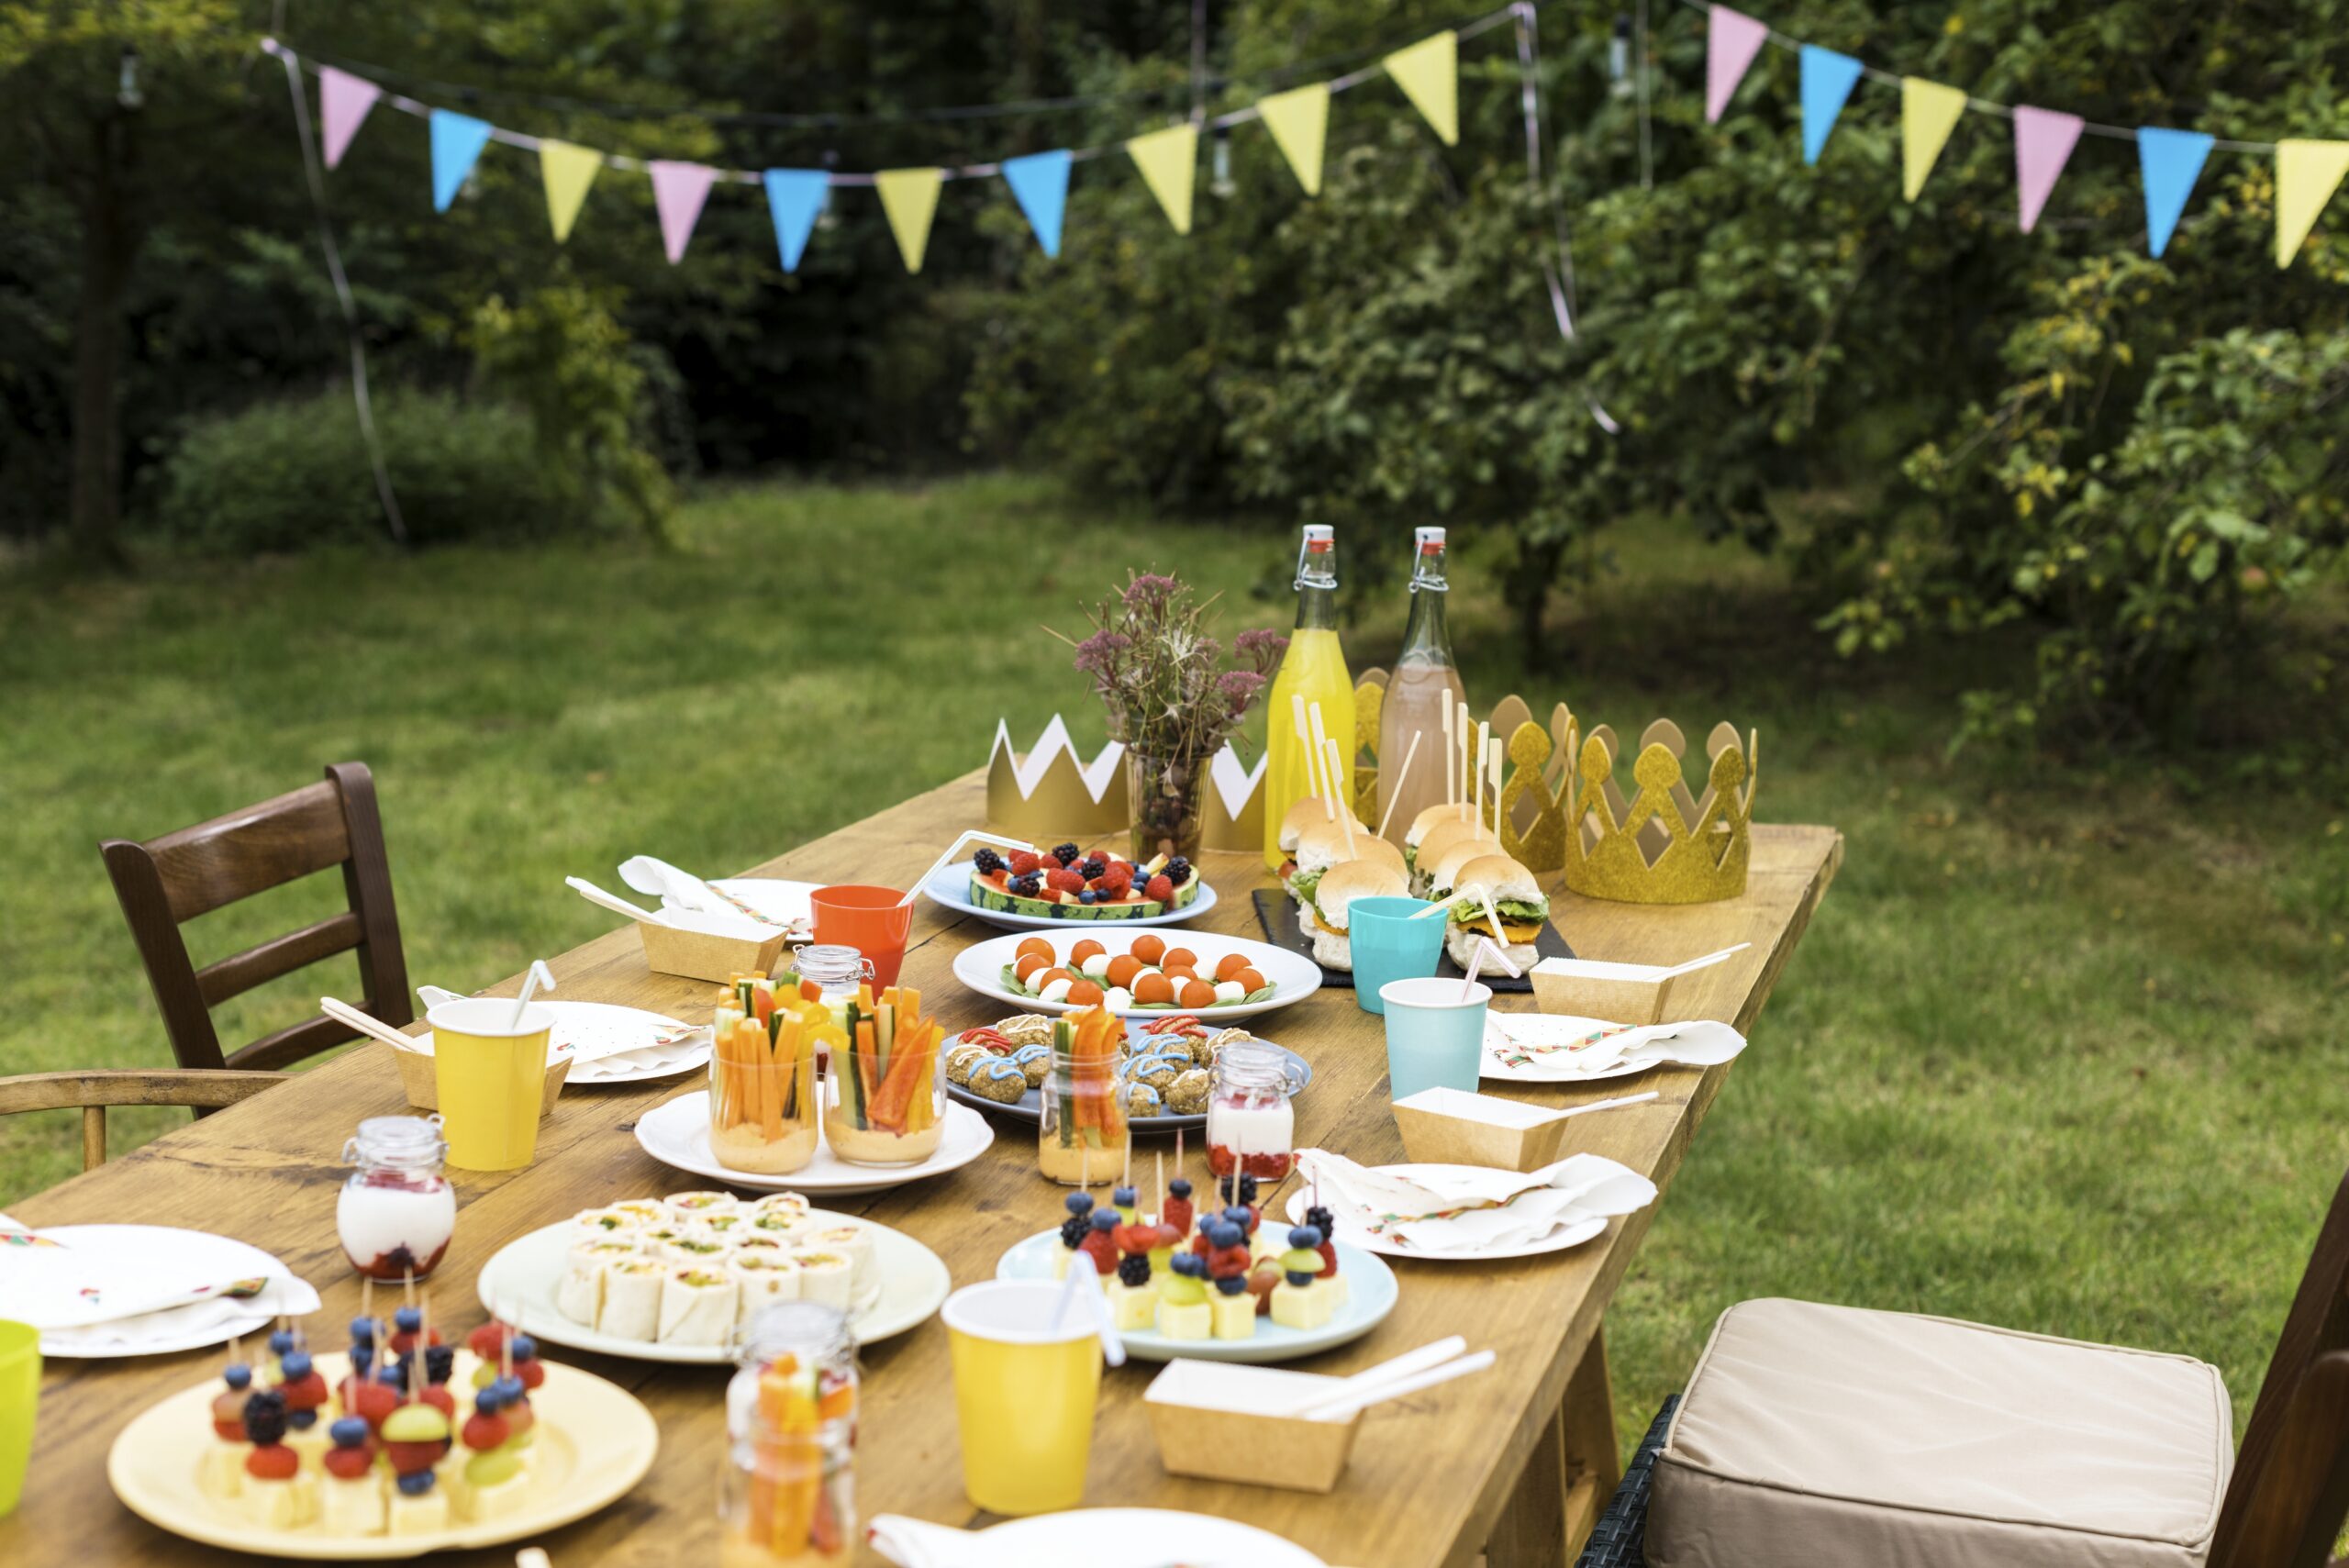 Host a Budget-Friendly Garden Party this Spring